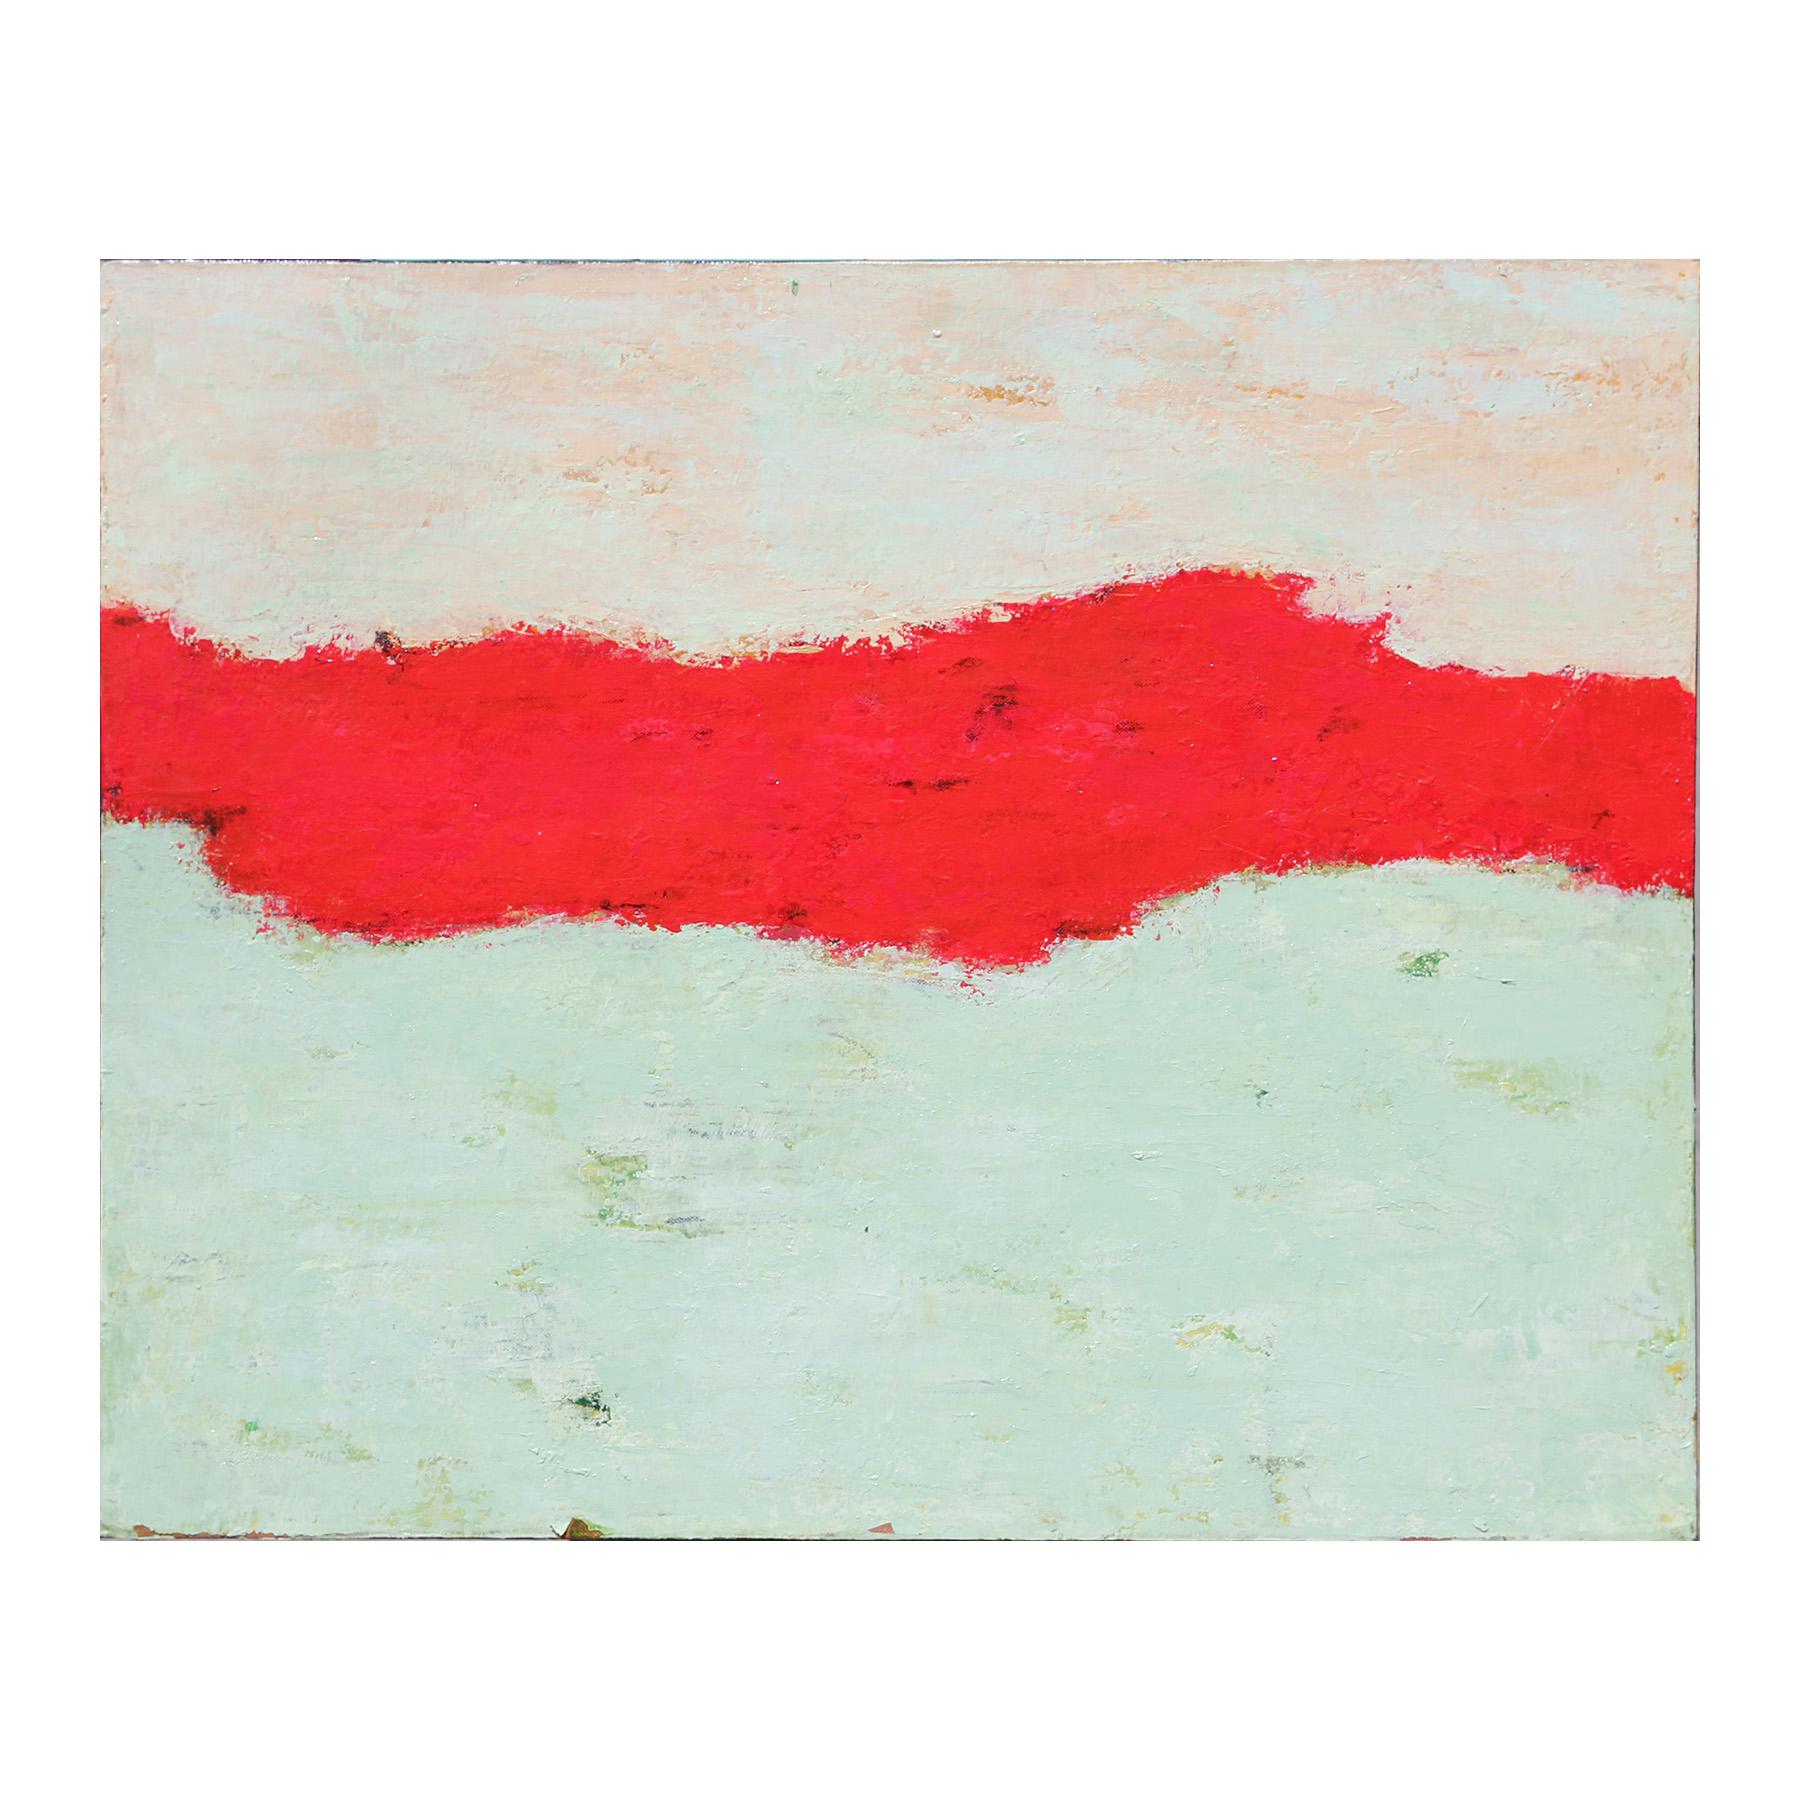 White, Red, and Light Blue Horizontal Abstract Expressionist Painting